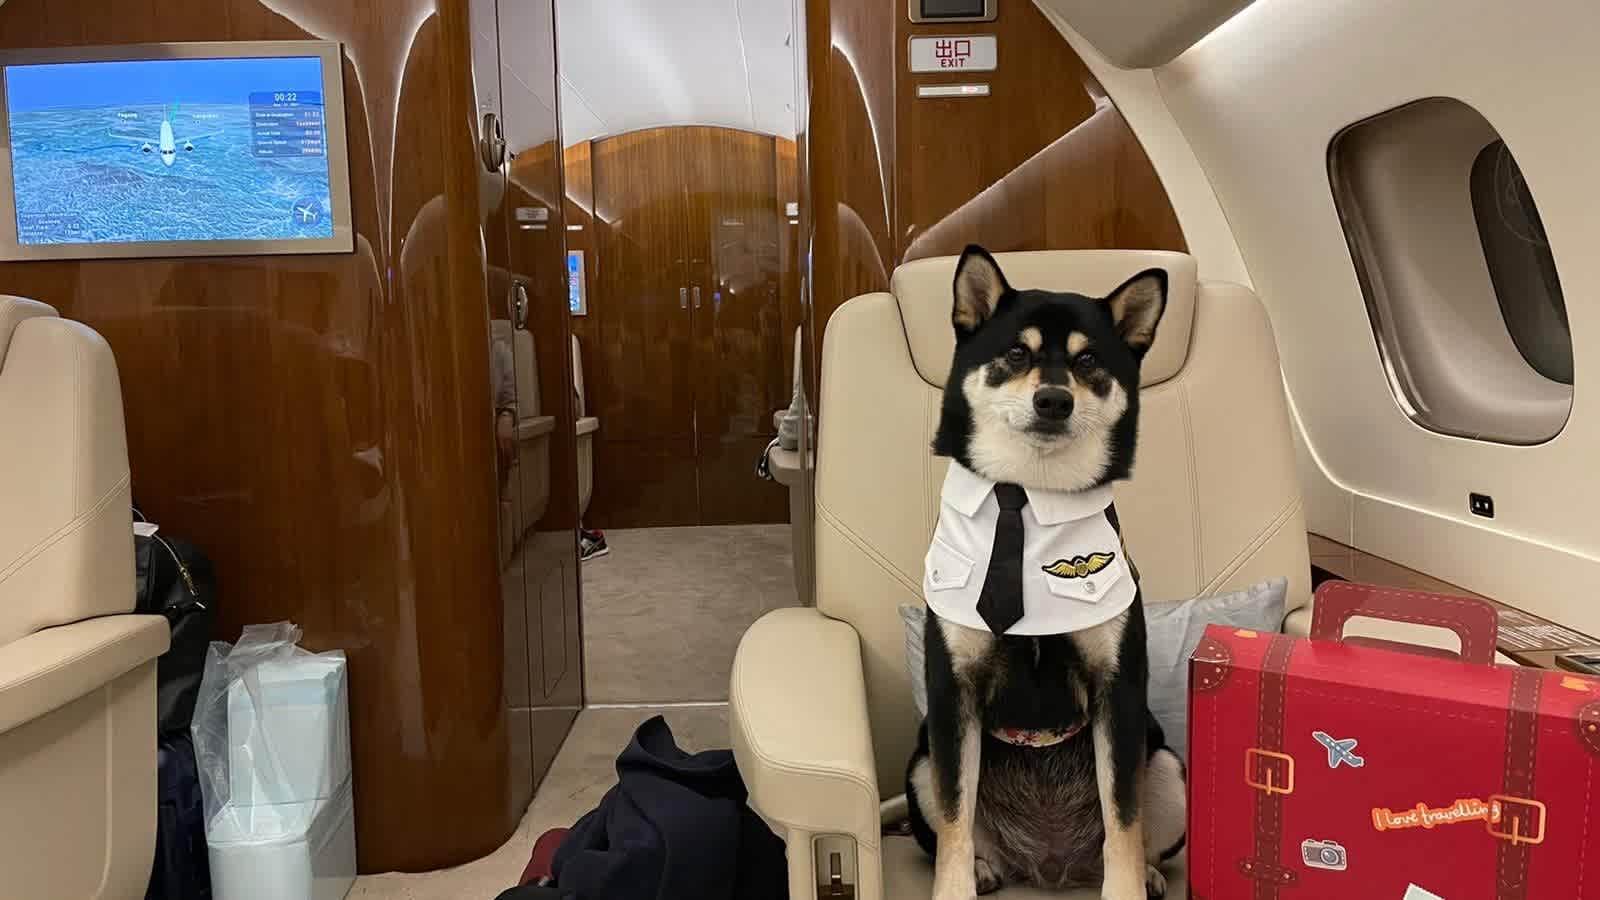 Departing Hong Kong residents fly their pets out of city on private jets